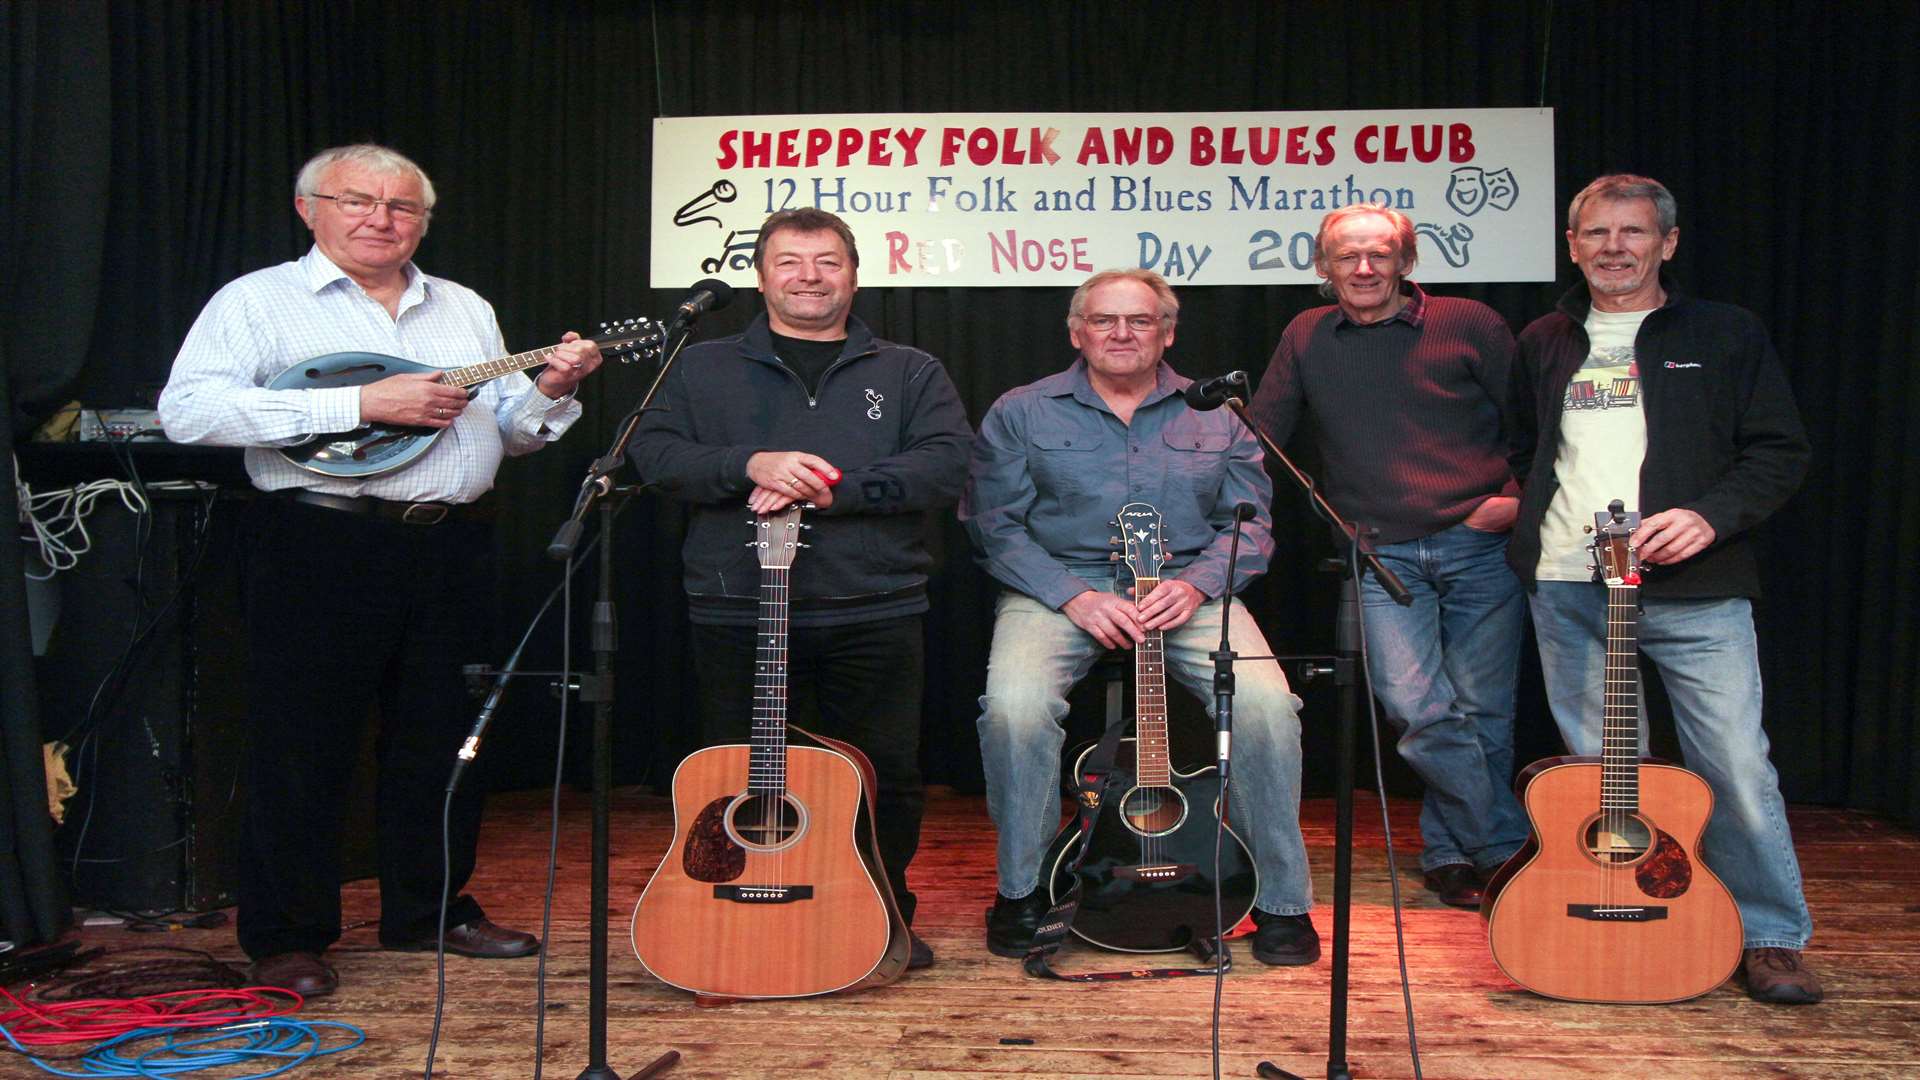 Members of the Sheppey Folk and Blues Club